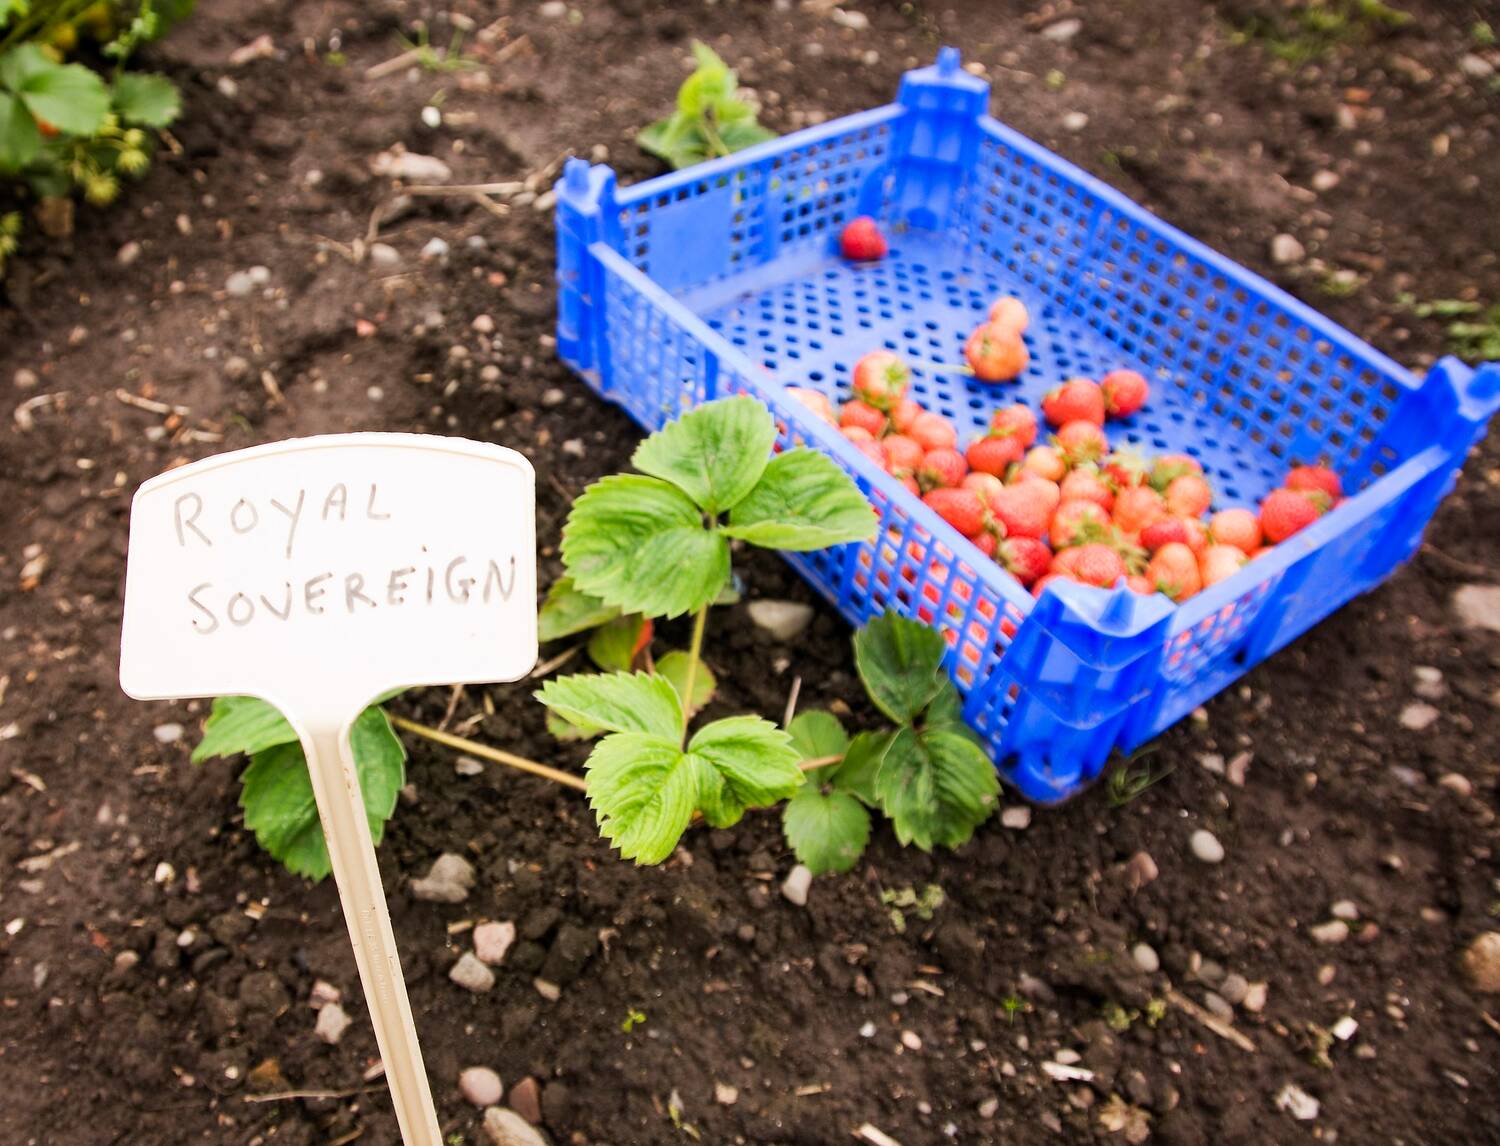 A blue crate with a pile of strawberries in the corner lies on a vegetable bed next to a strawberry plant with a white label stating: Royal Sovereign.